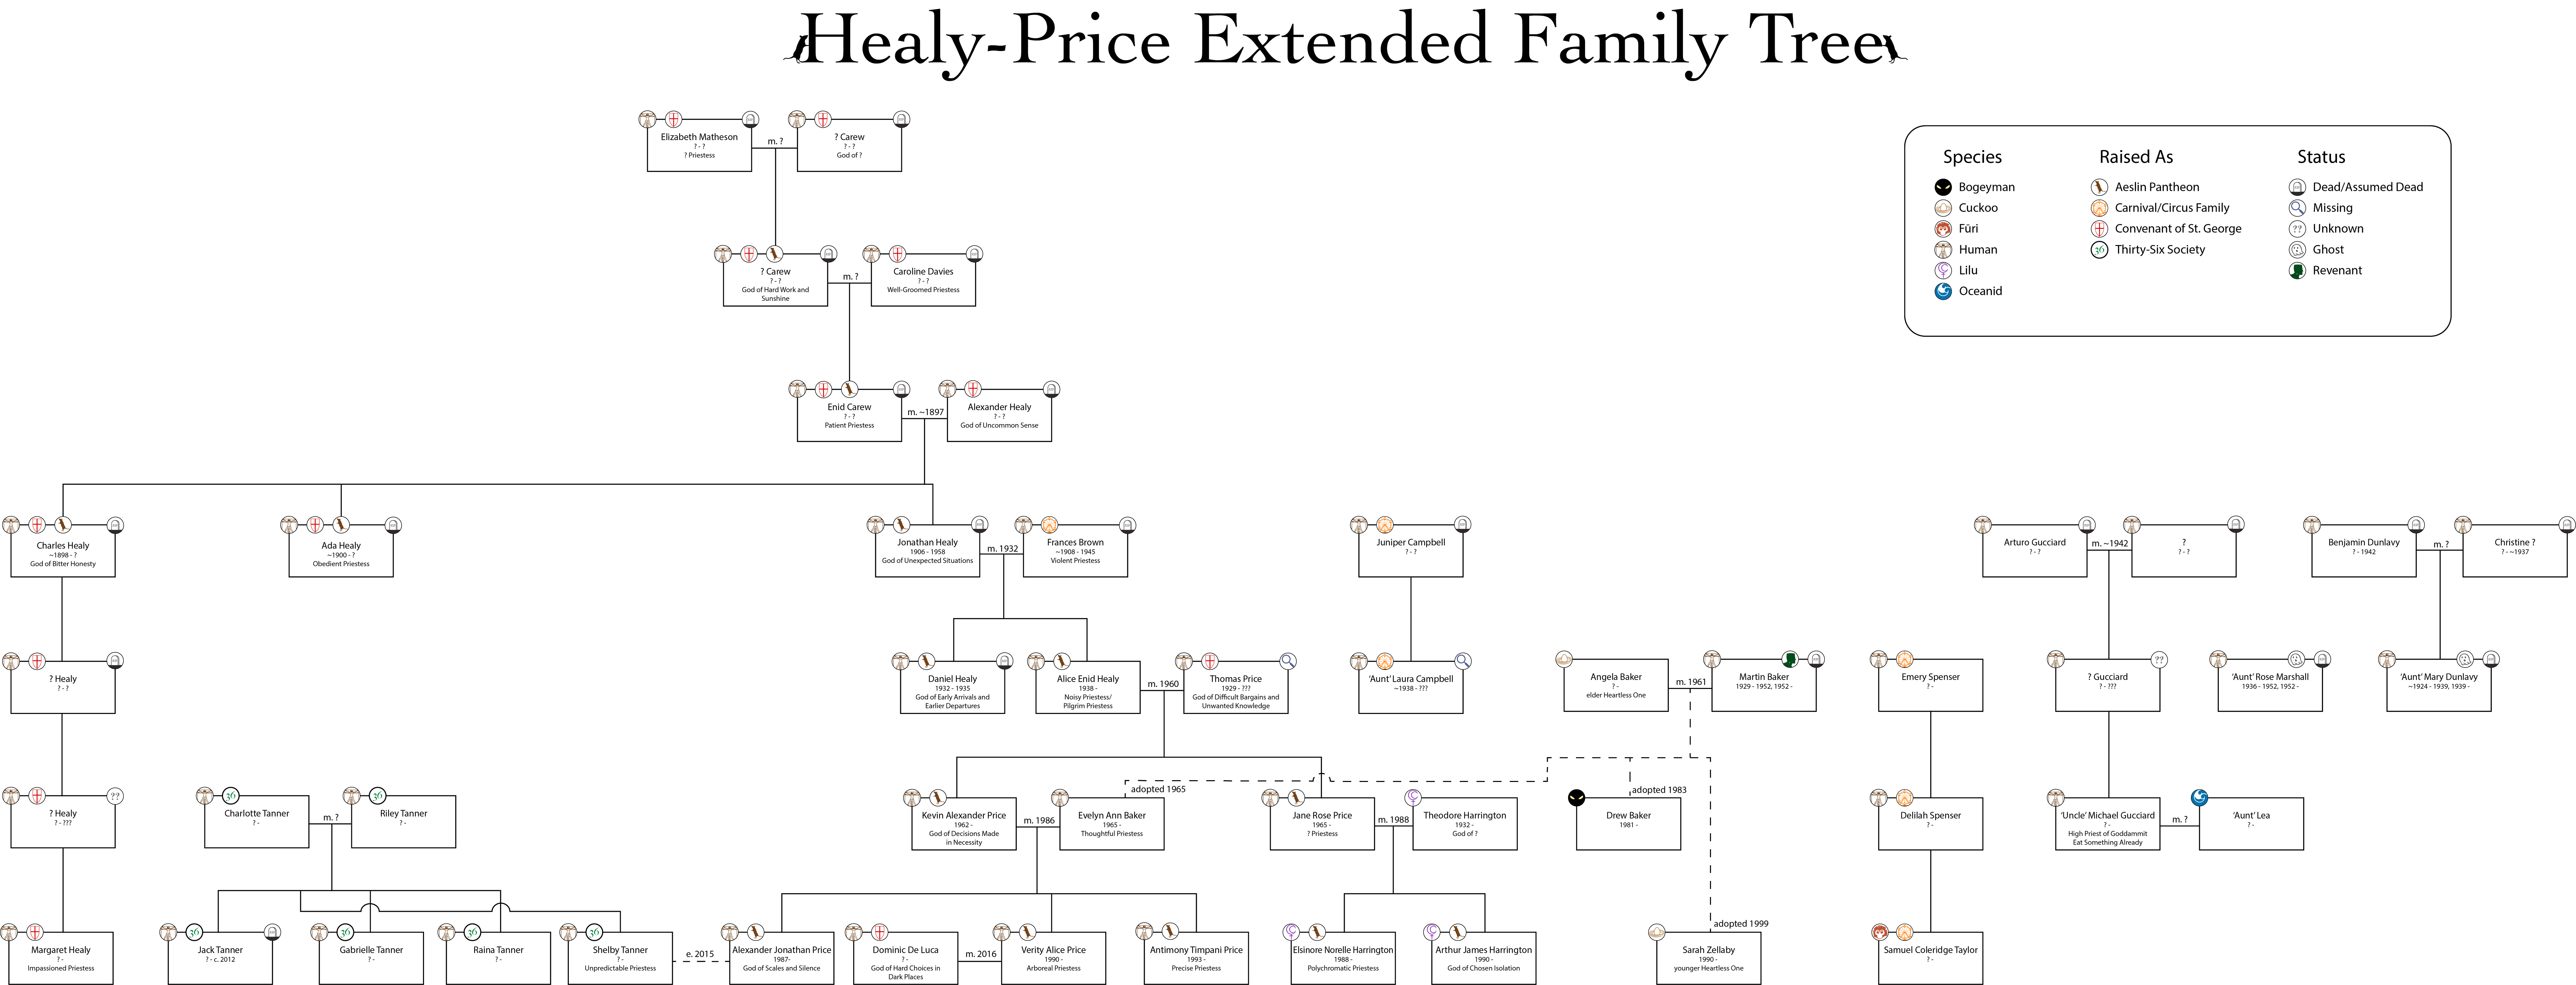 Healy-Price Extended Family Tree